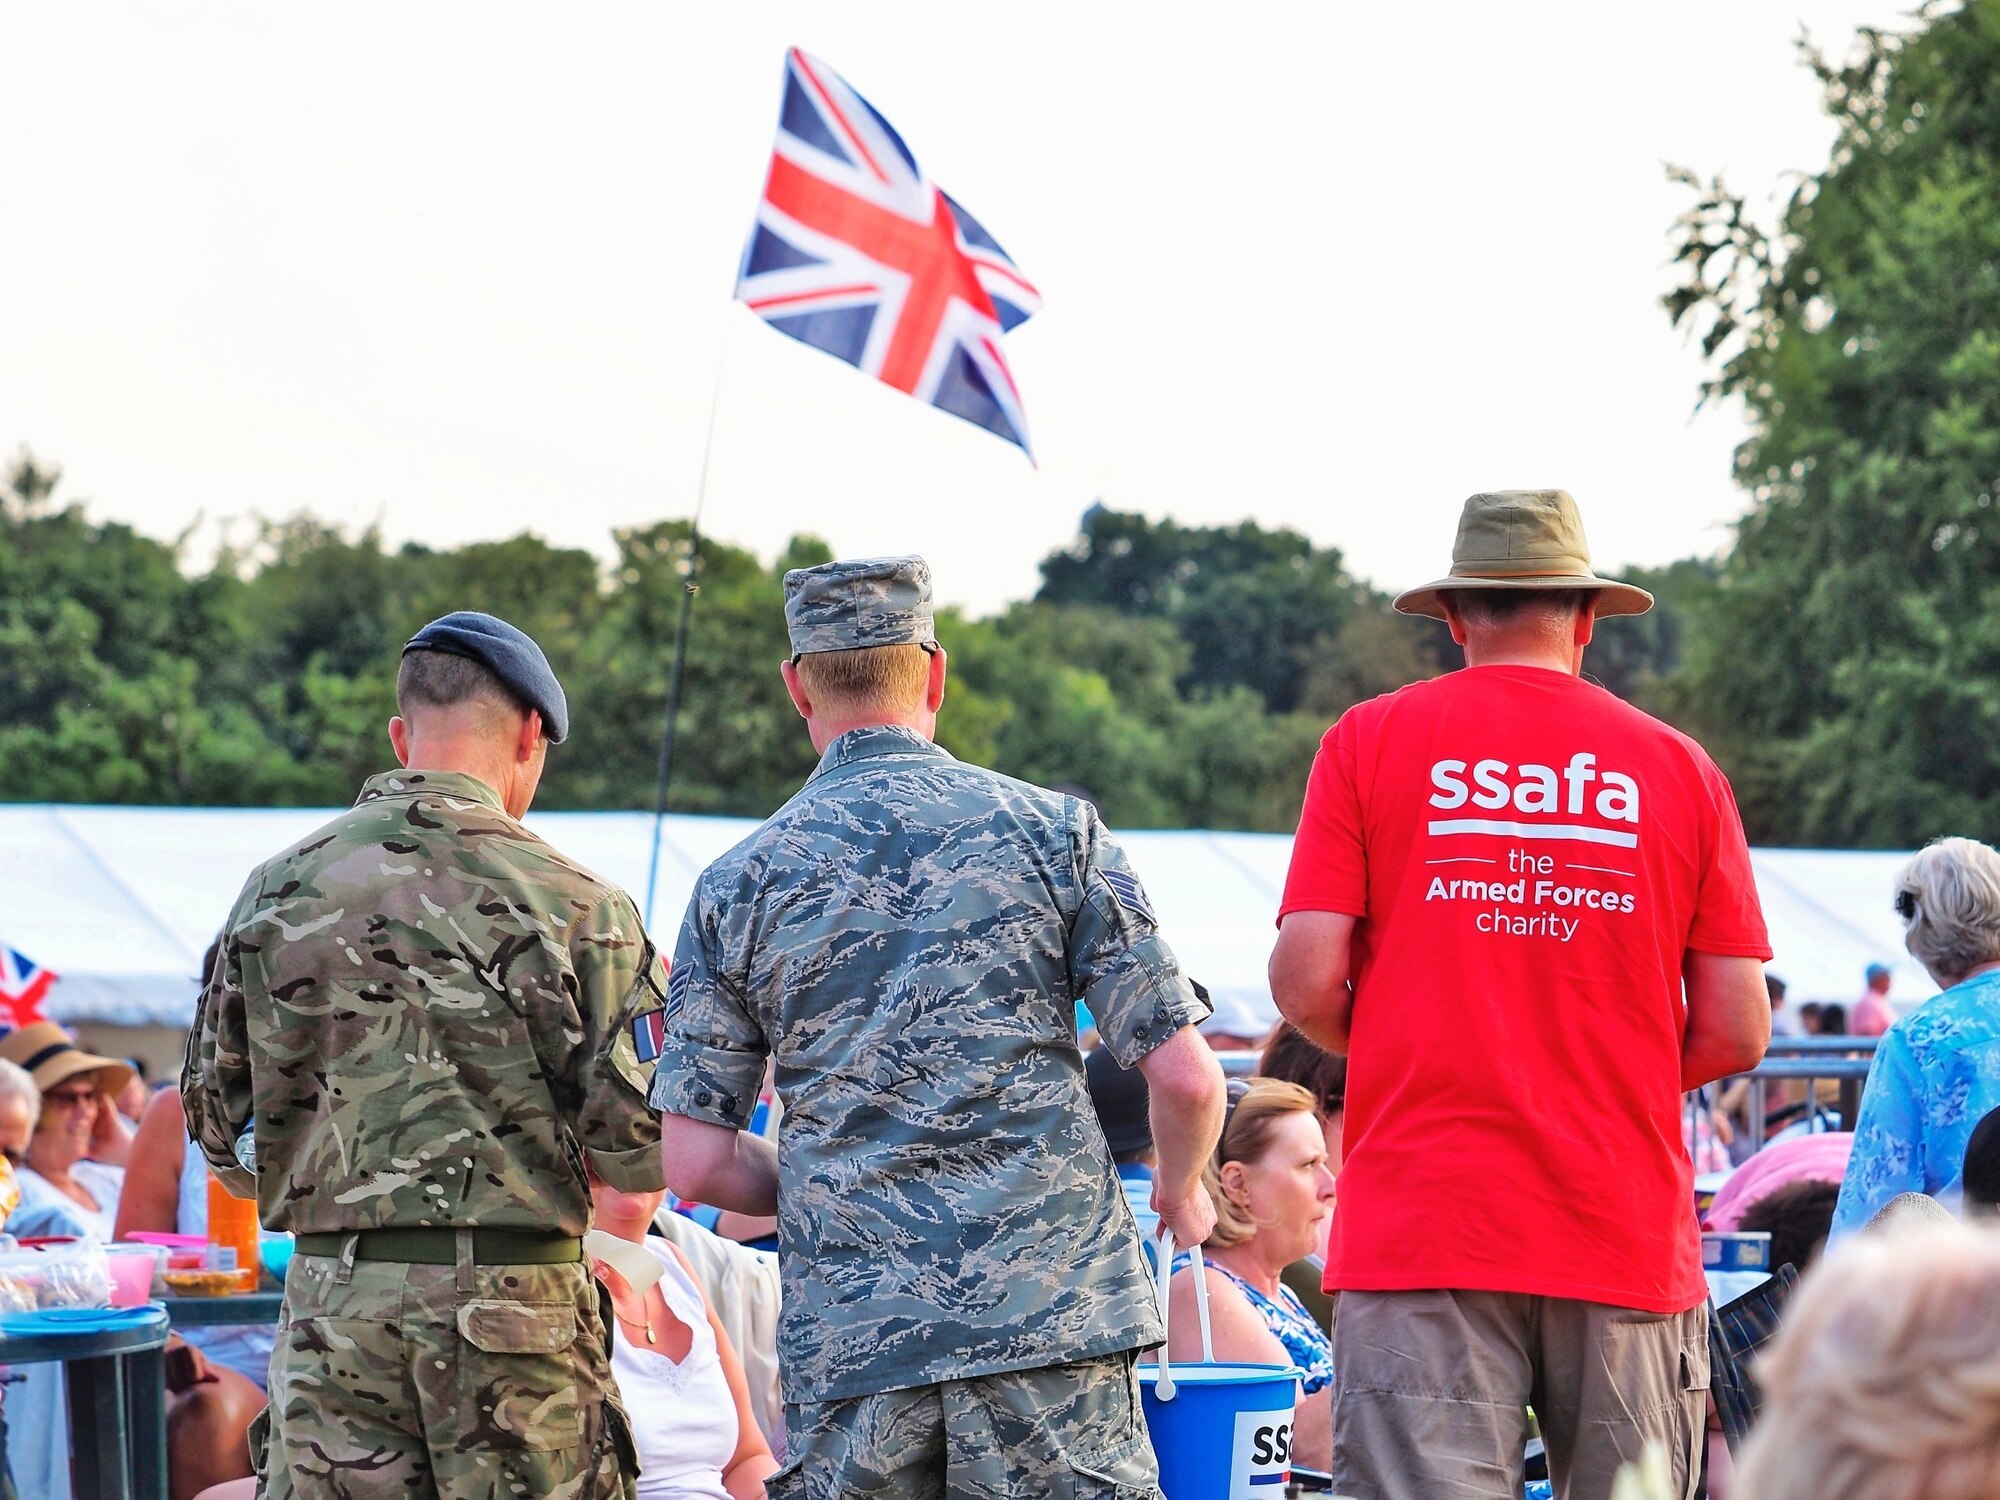 U.S. Air Force Staff Sgt. Jason Chipley (center), 145th Logistics Readiness Squadron, helps with collecting donations for a charity event during Battle Proms at Hatfield Park, Hatfield, United Kingdom, July 14, 2018. The Military Reserve Exchange Program not only allows military members to learn and exchange ideas about their respective career fields, but it also provides the opportunity to be immersed in the host country’s culture.